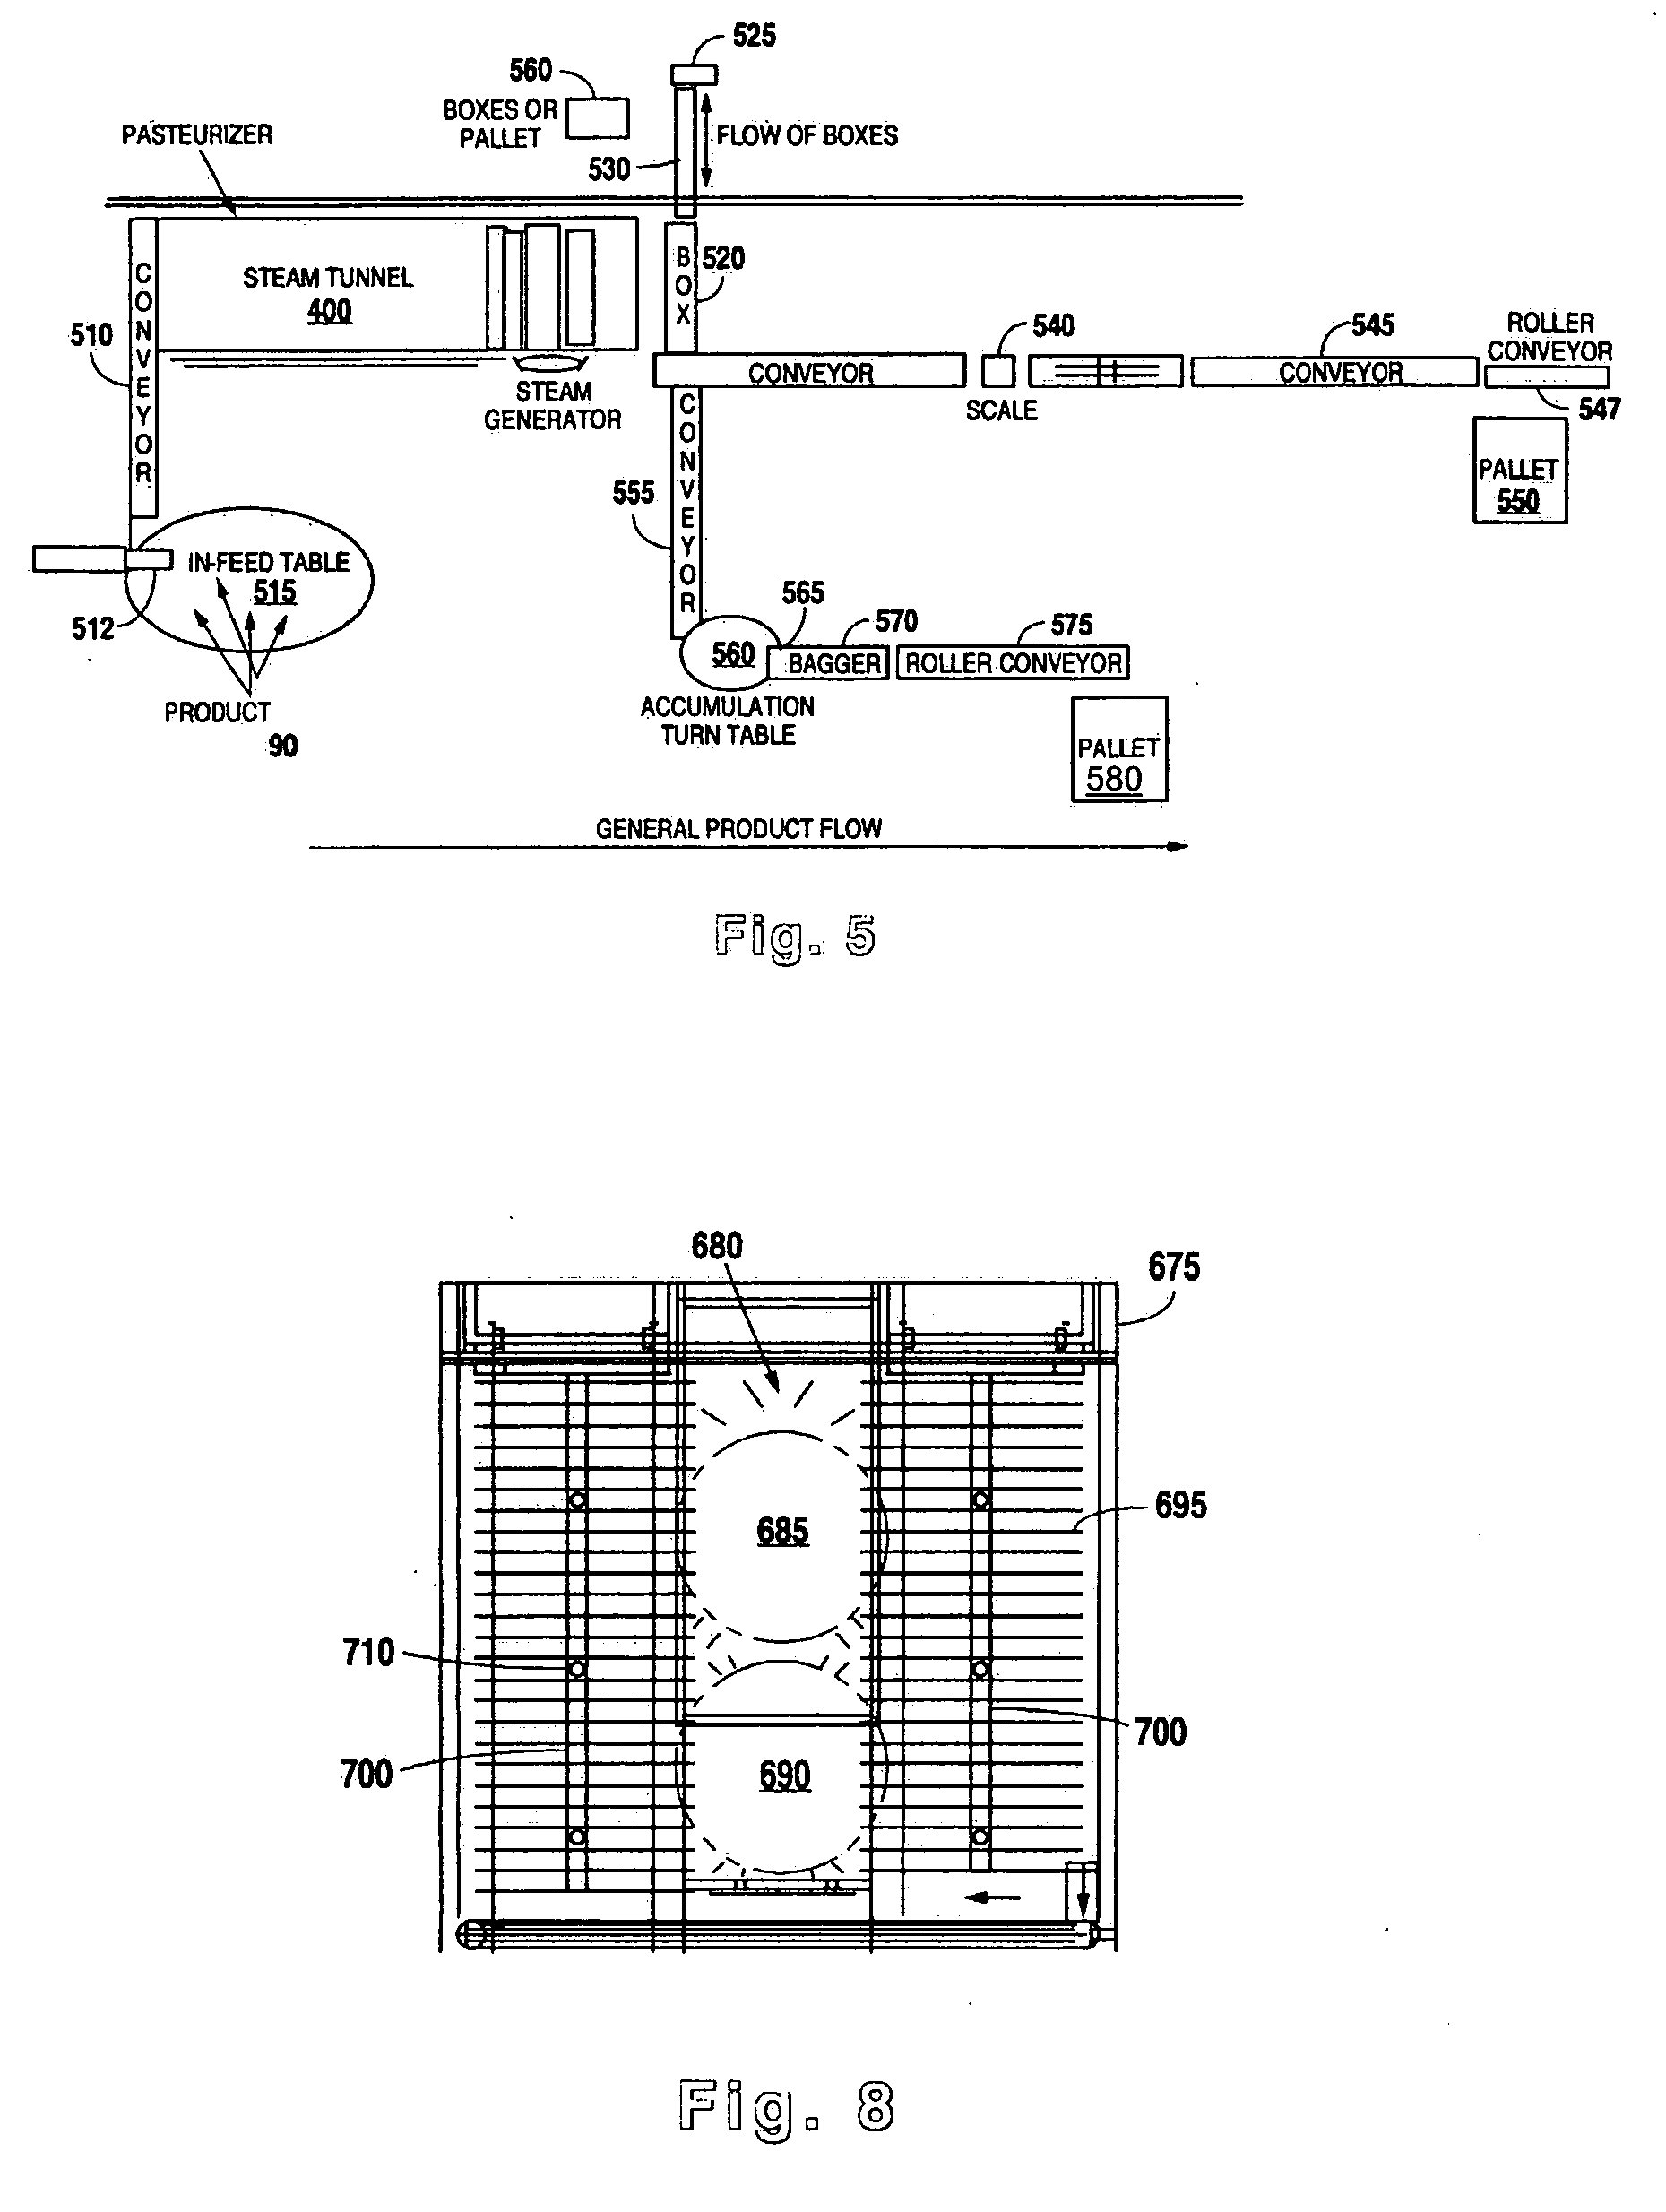 Apparatus and method for microbial intervention and pasteurization of food and equipment